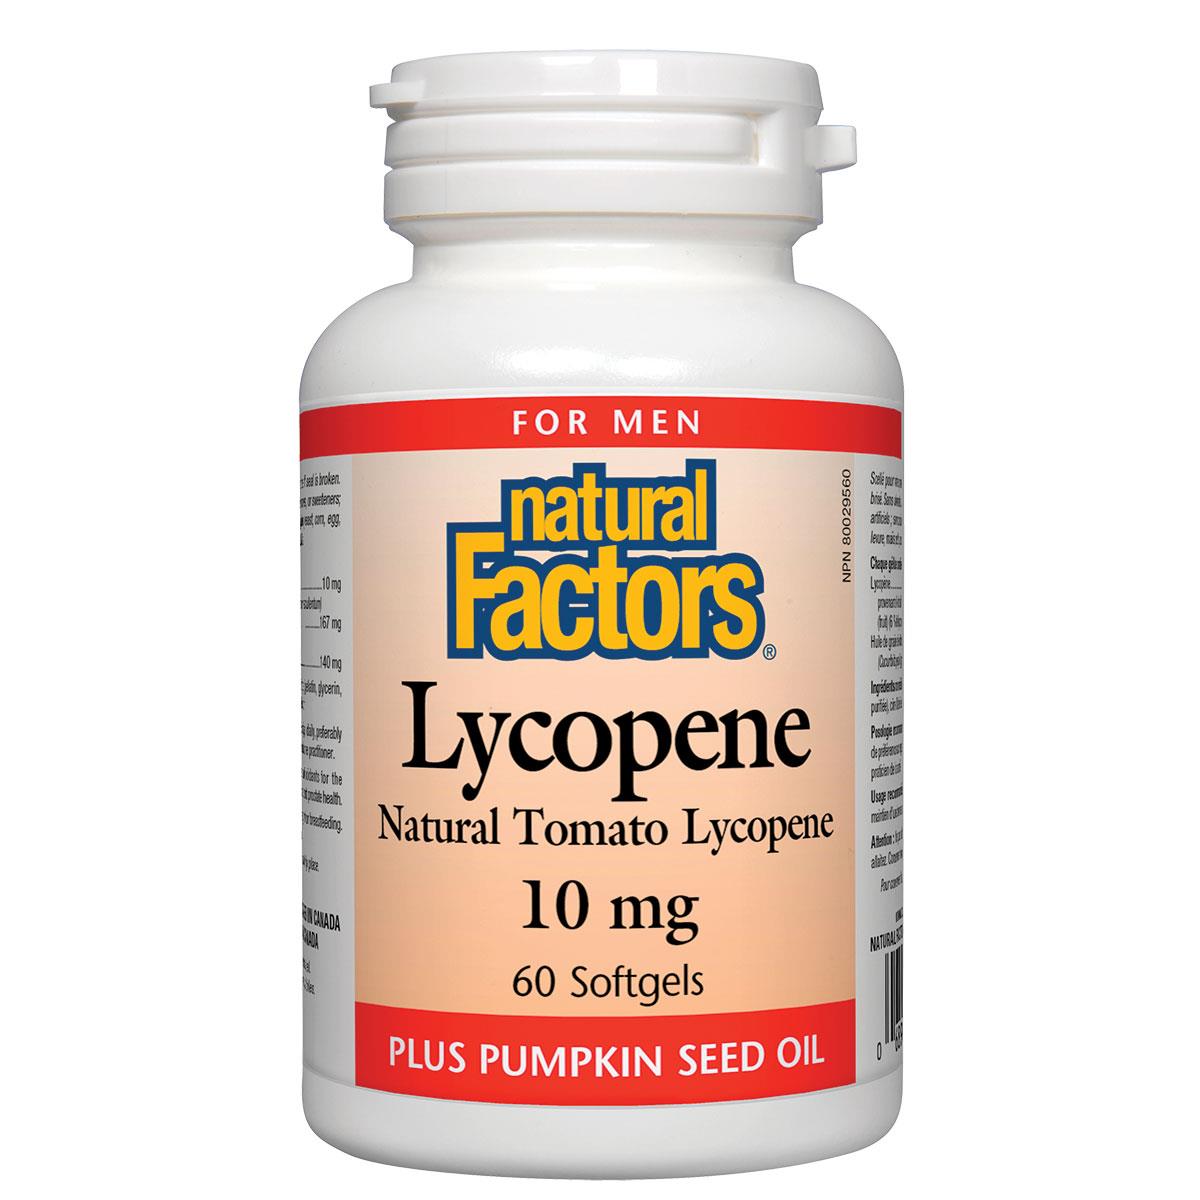 Natural Factors Lycopene, 10mg, 60 Softgels with Pumpkin Seed Oil